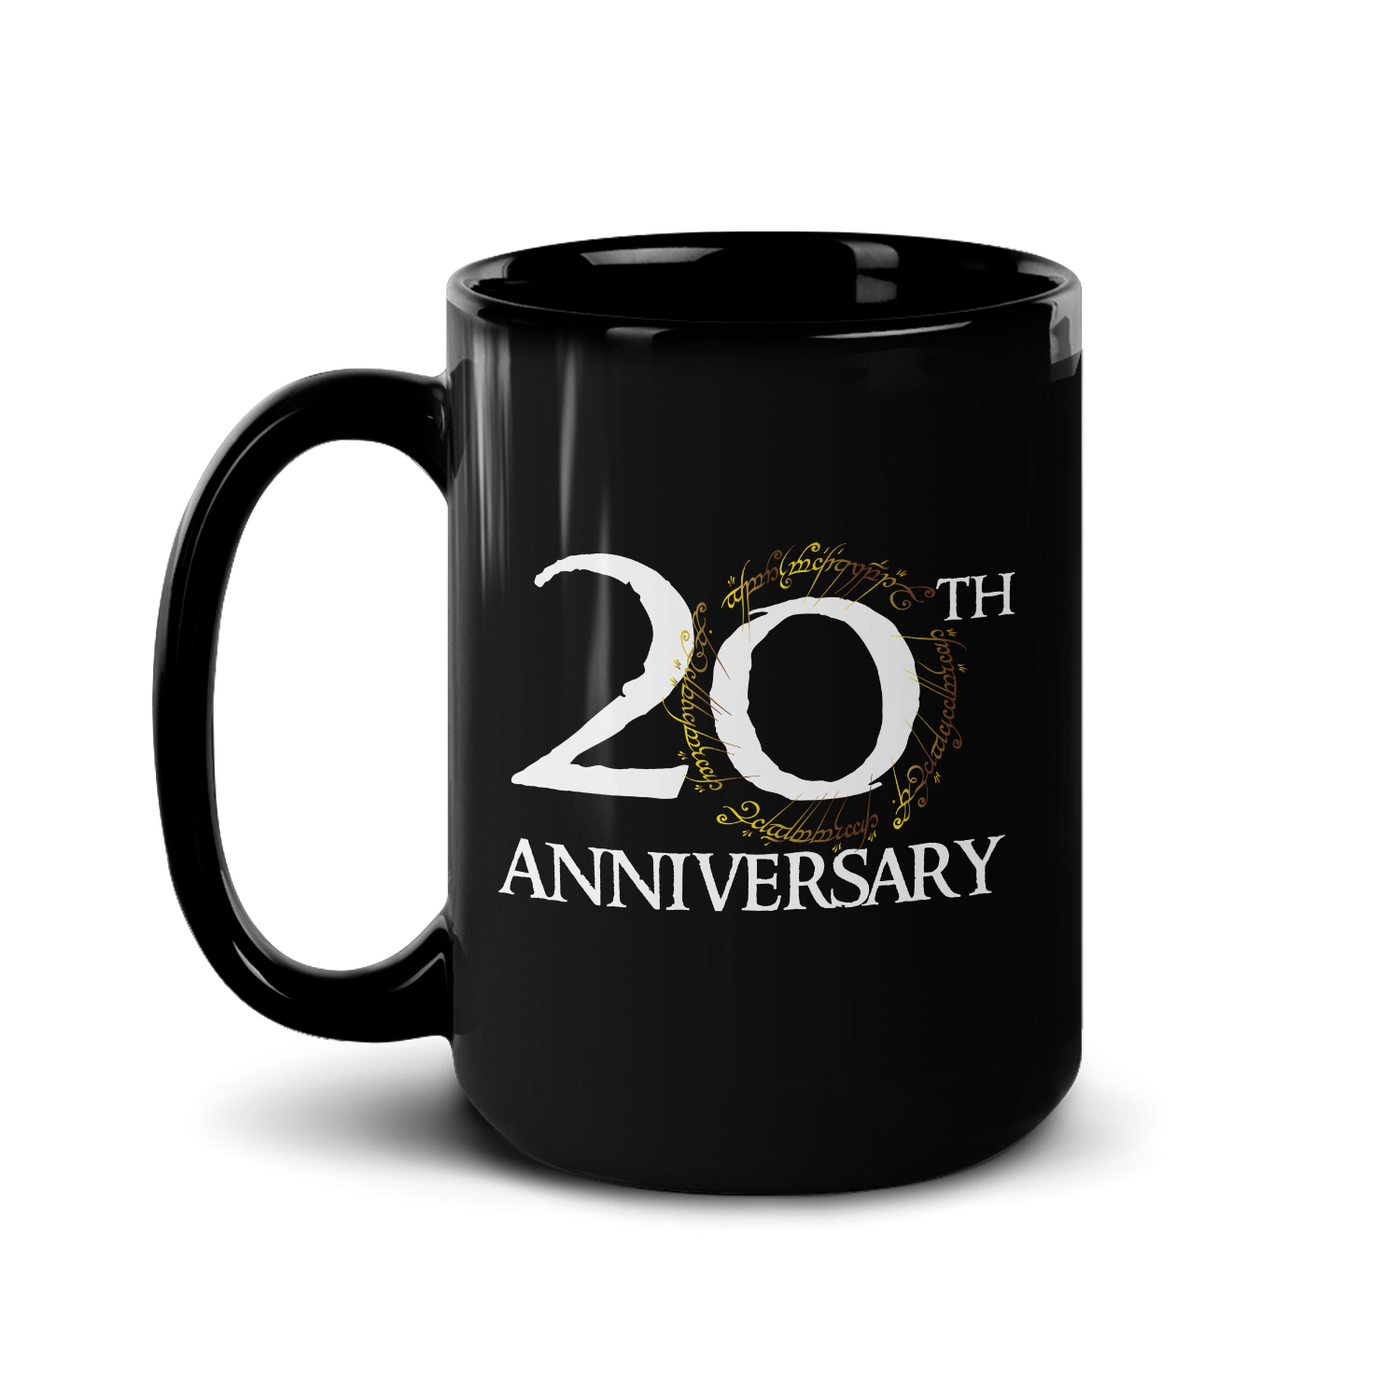 The Lord of the Rings 20th Anniversary The Fellowship of the Ring Black Mug